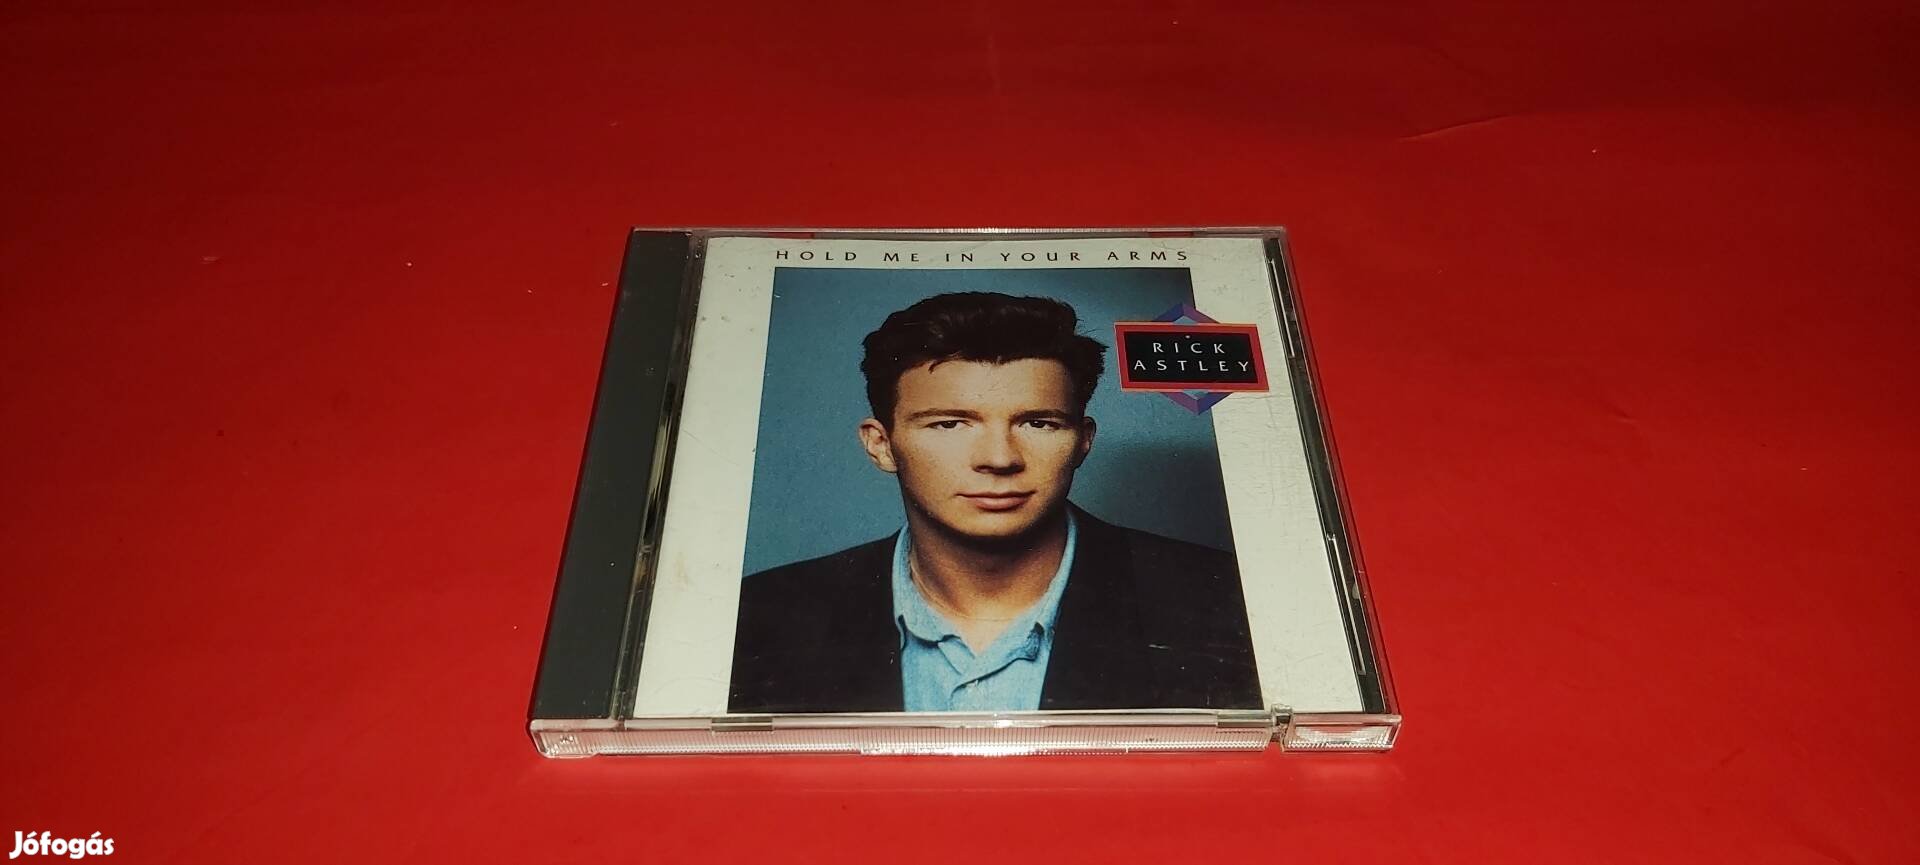 Rick Asthley Hold me in your arms Cd 1988 U.S.A.